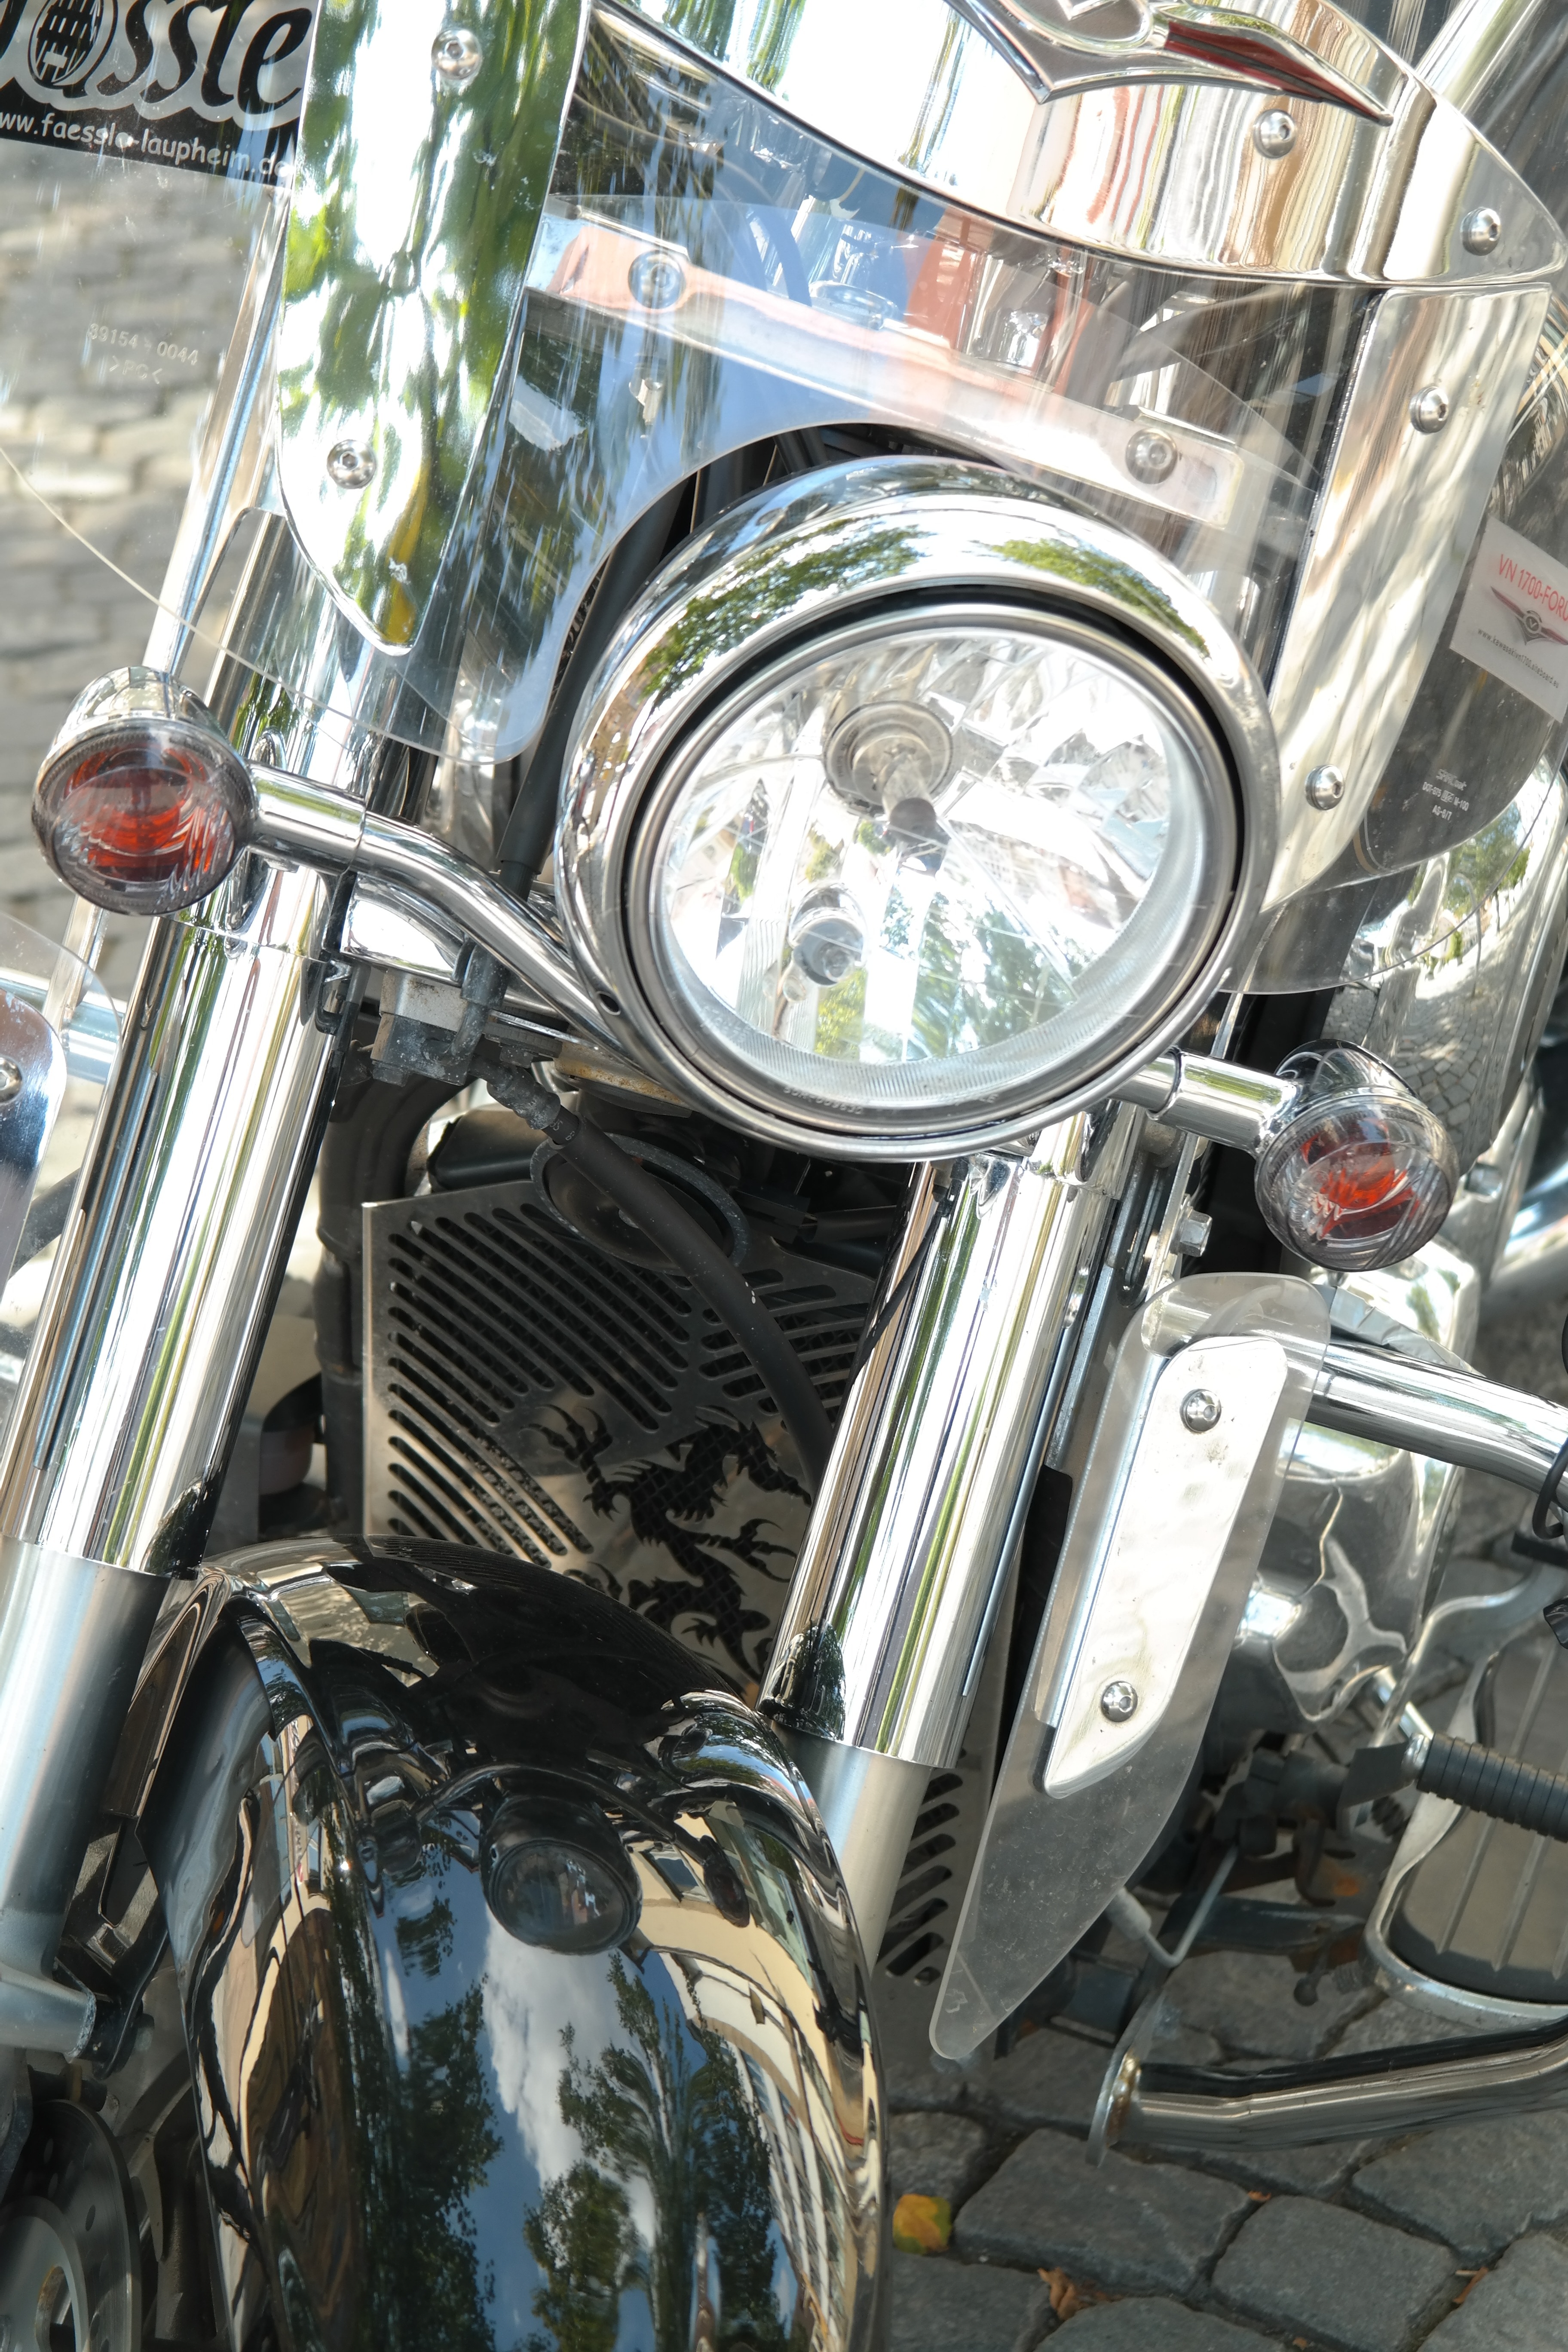 Front Light, Light, Motorcycle, no people, close-up